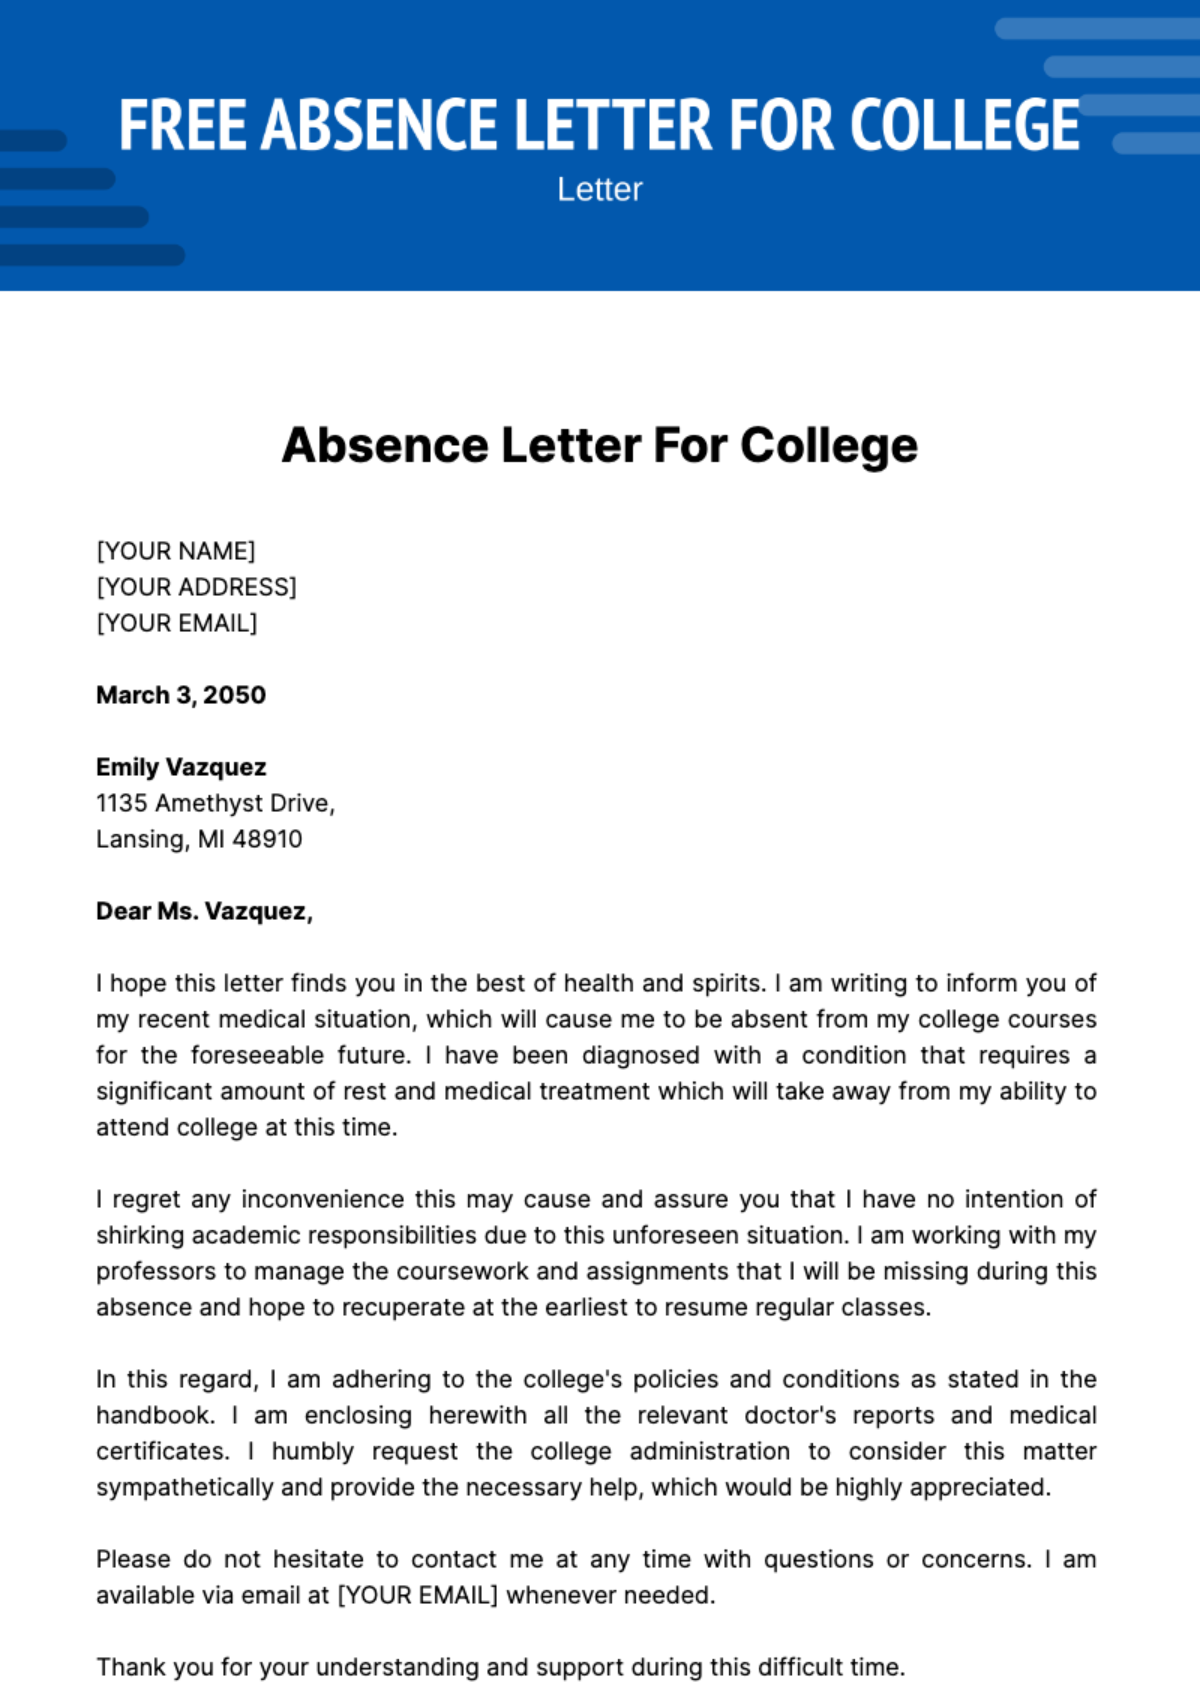 Free Absence Letter for College Template